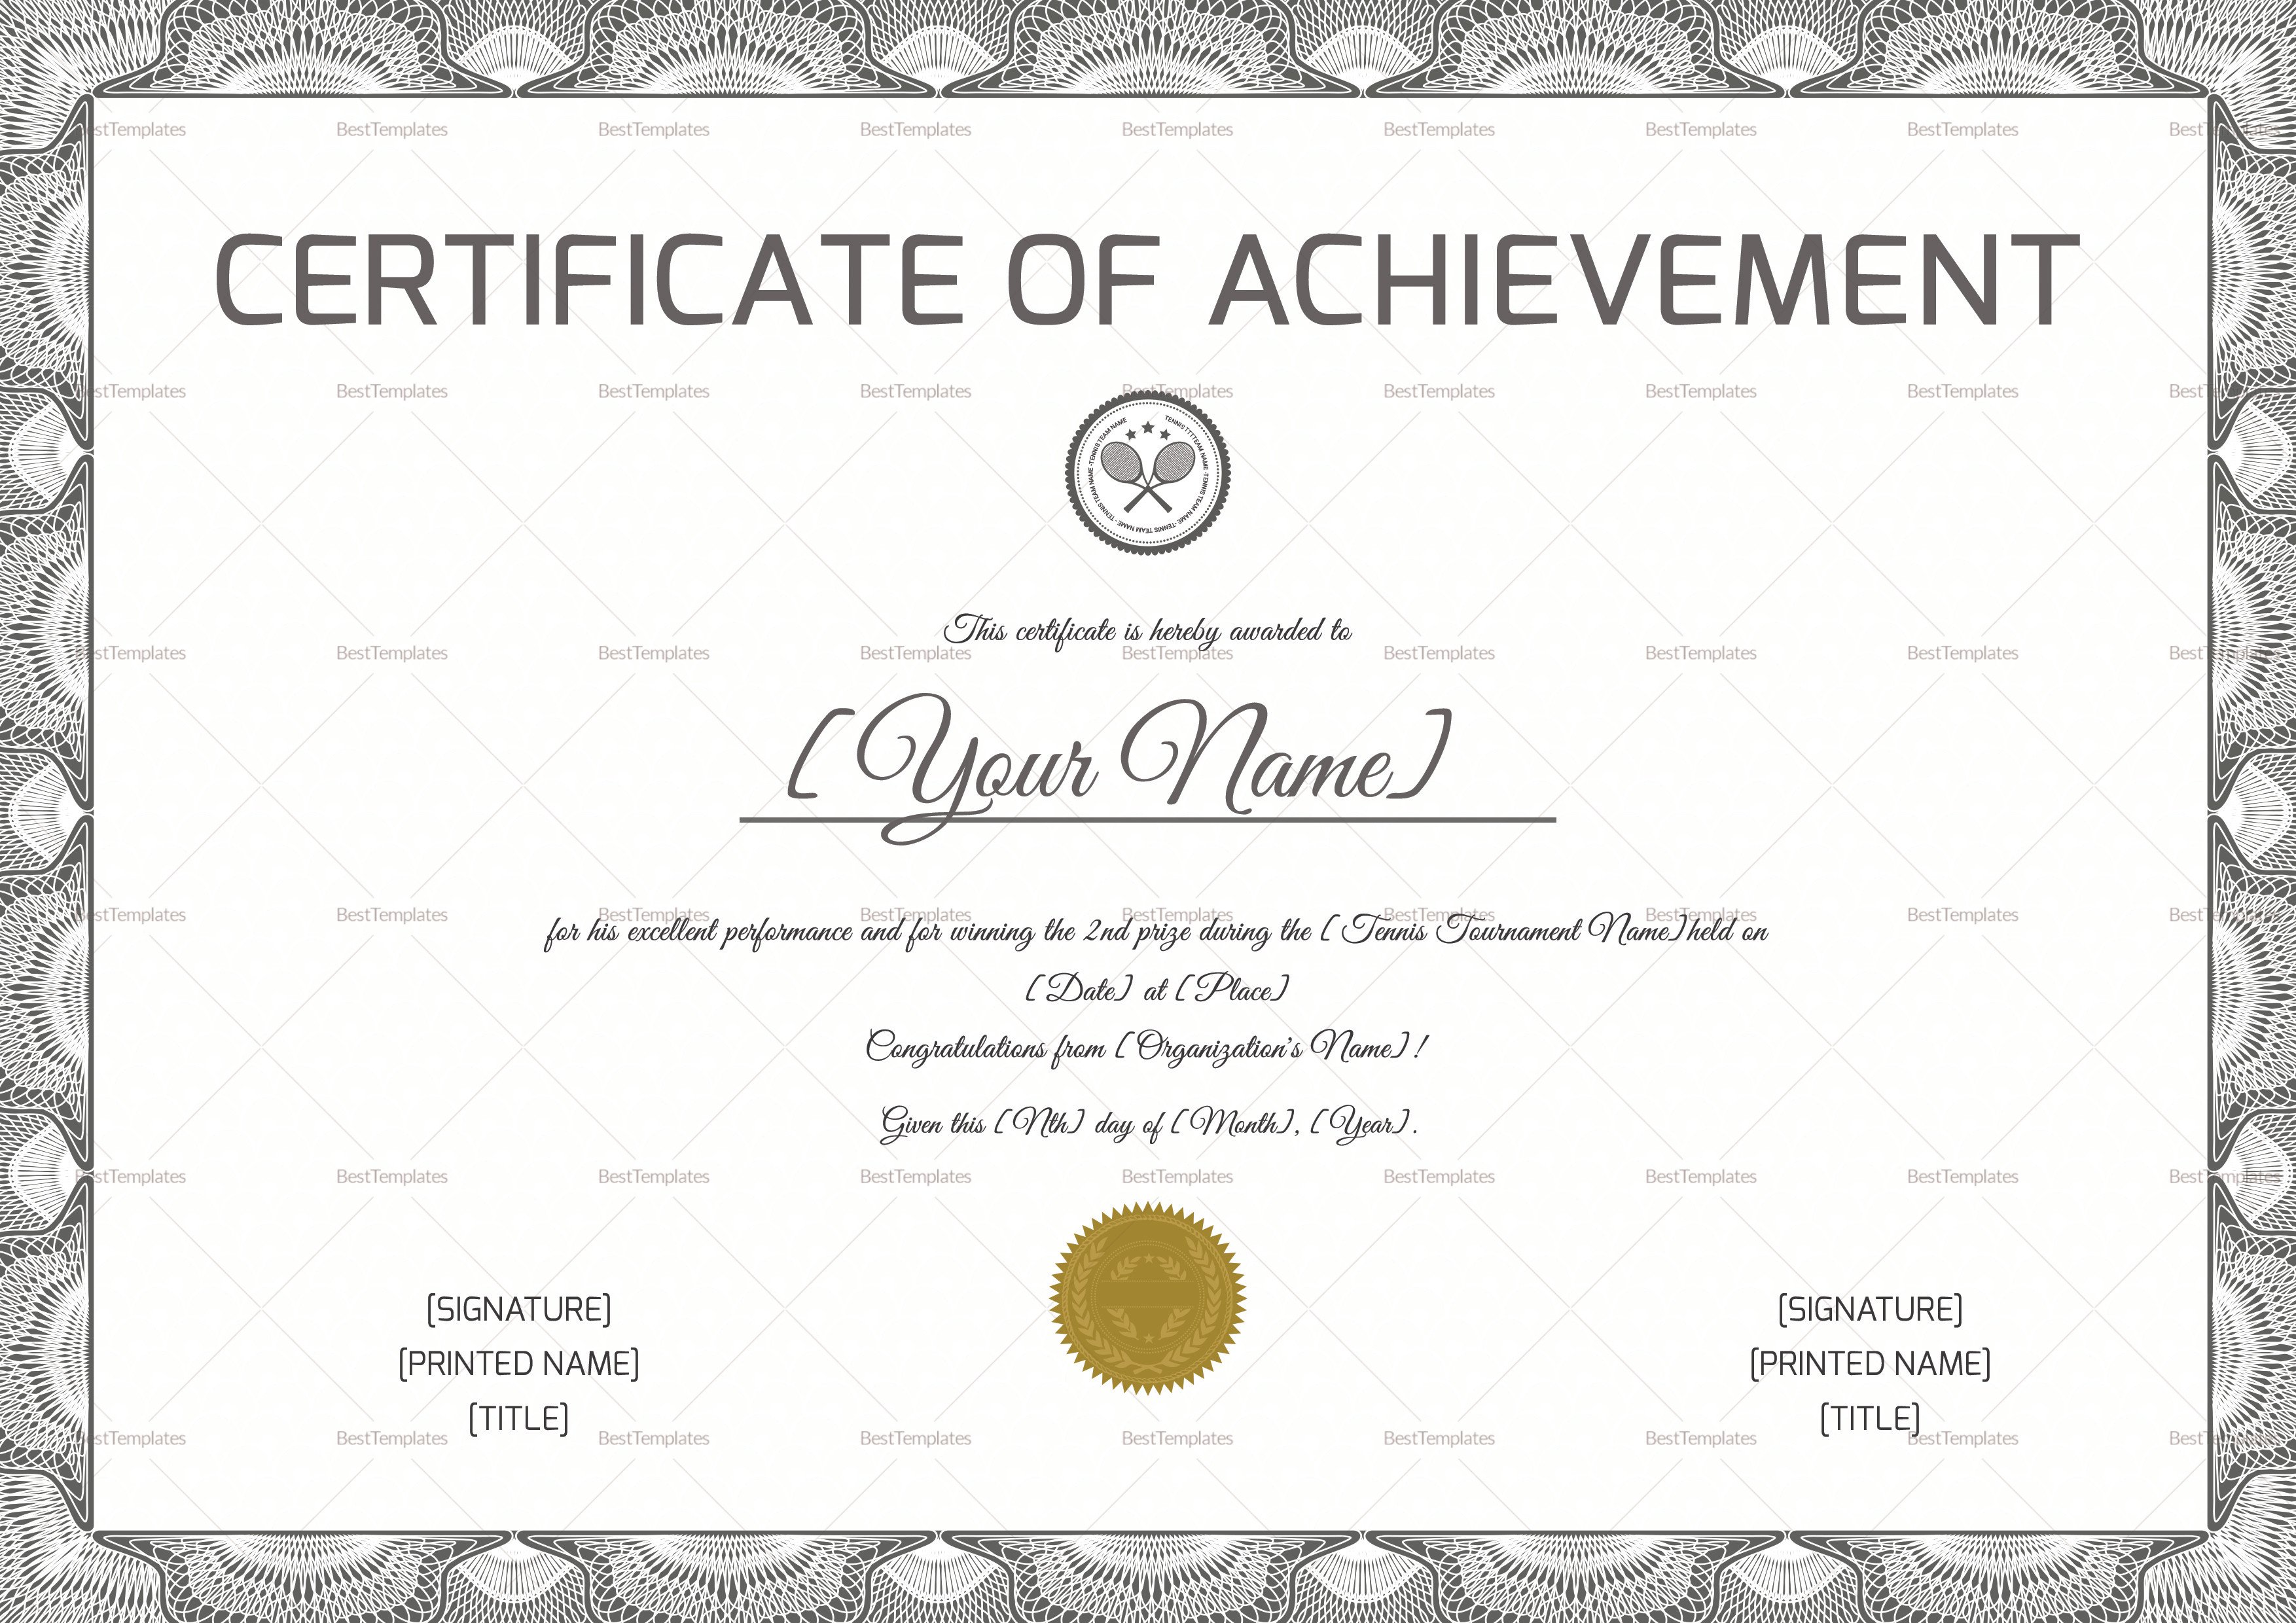 Certificate Of Achievement Template Word Tennis Achievement Certificate Design Template In Psd Word